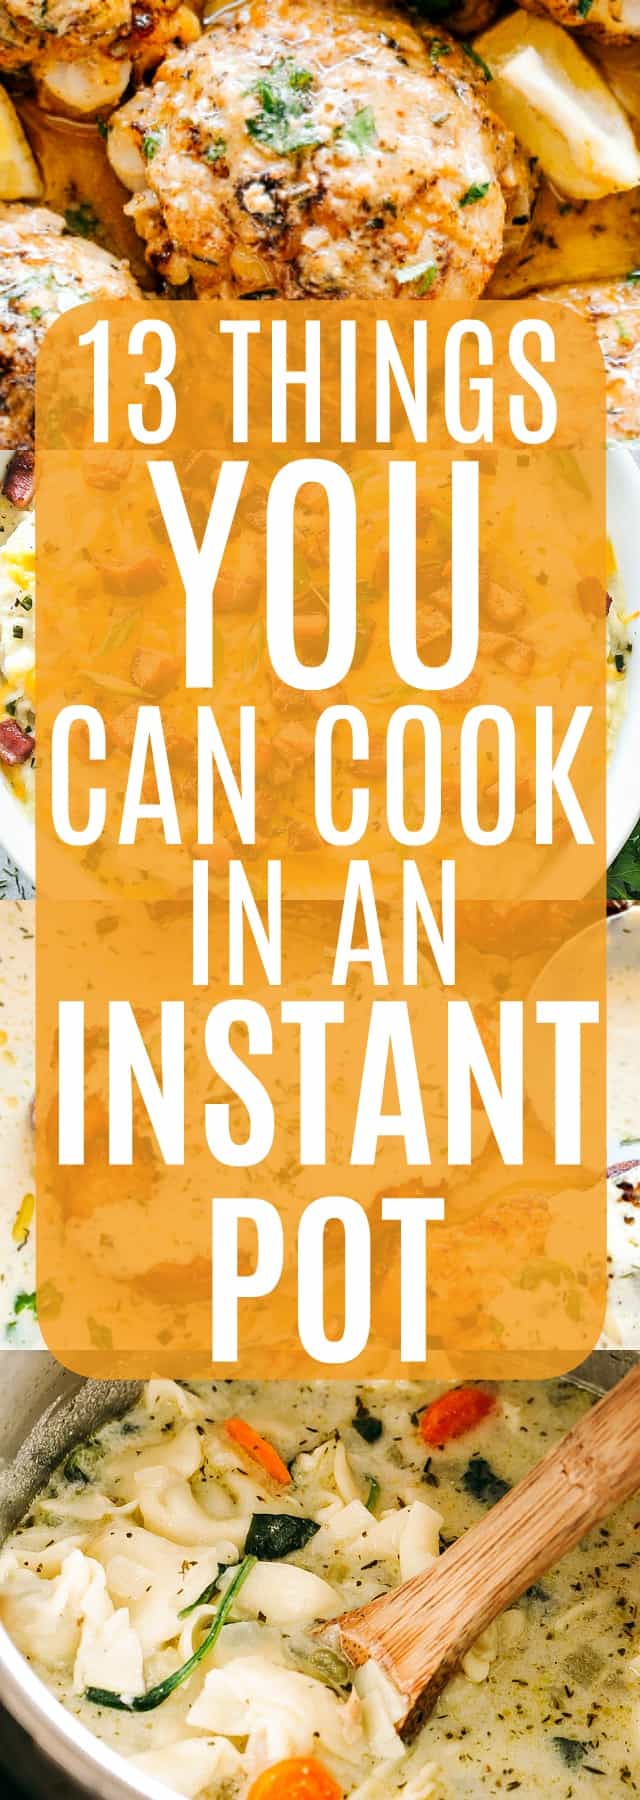 Pin Image for 13 Things You Can Cook In An Instant Pot